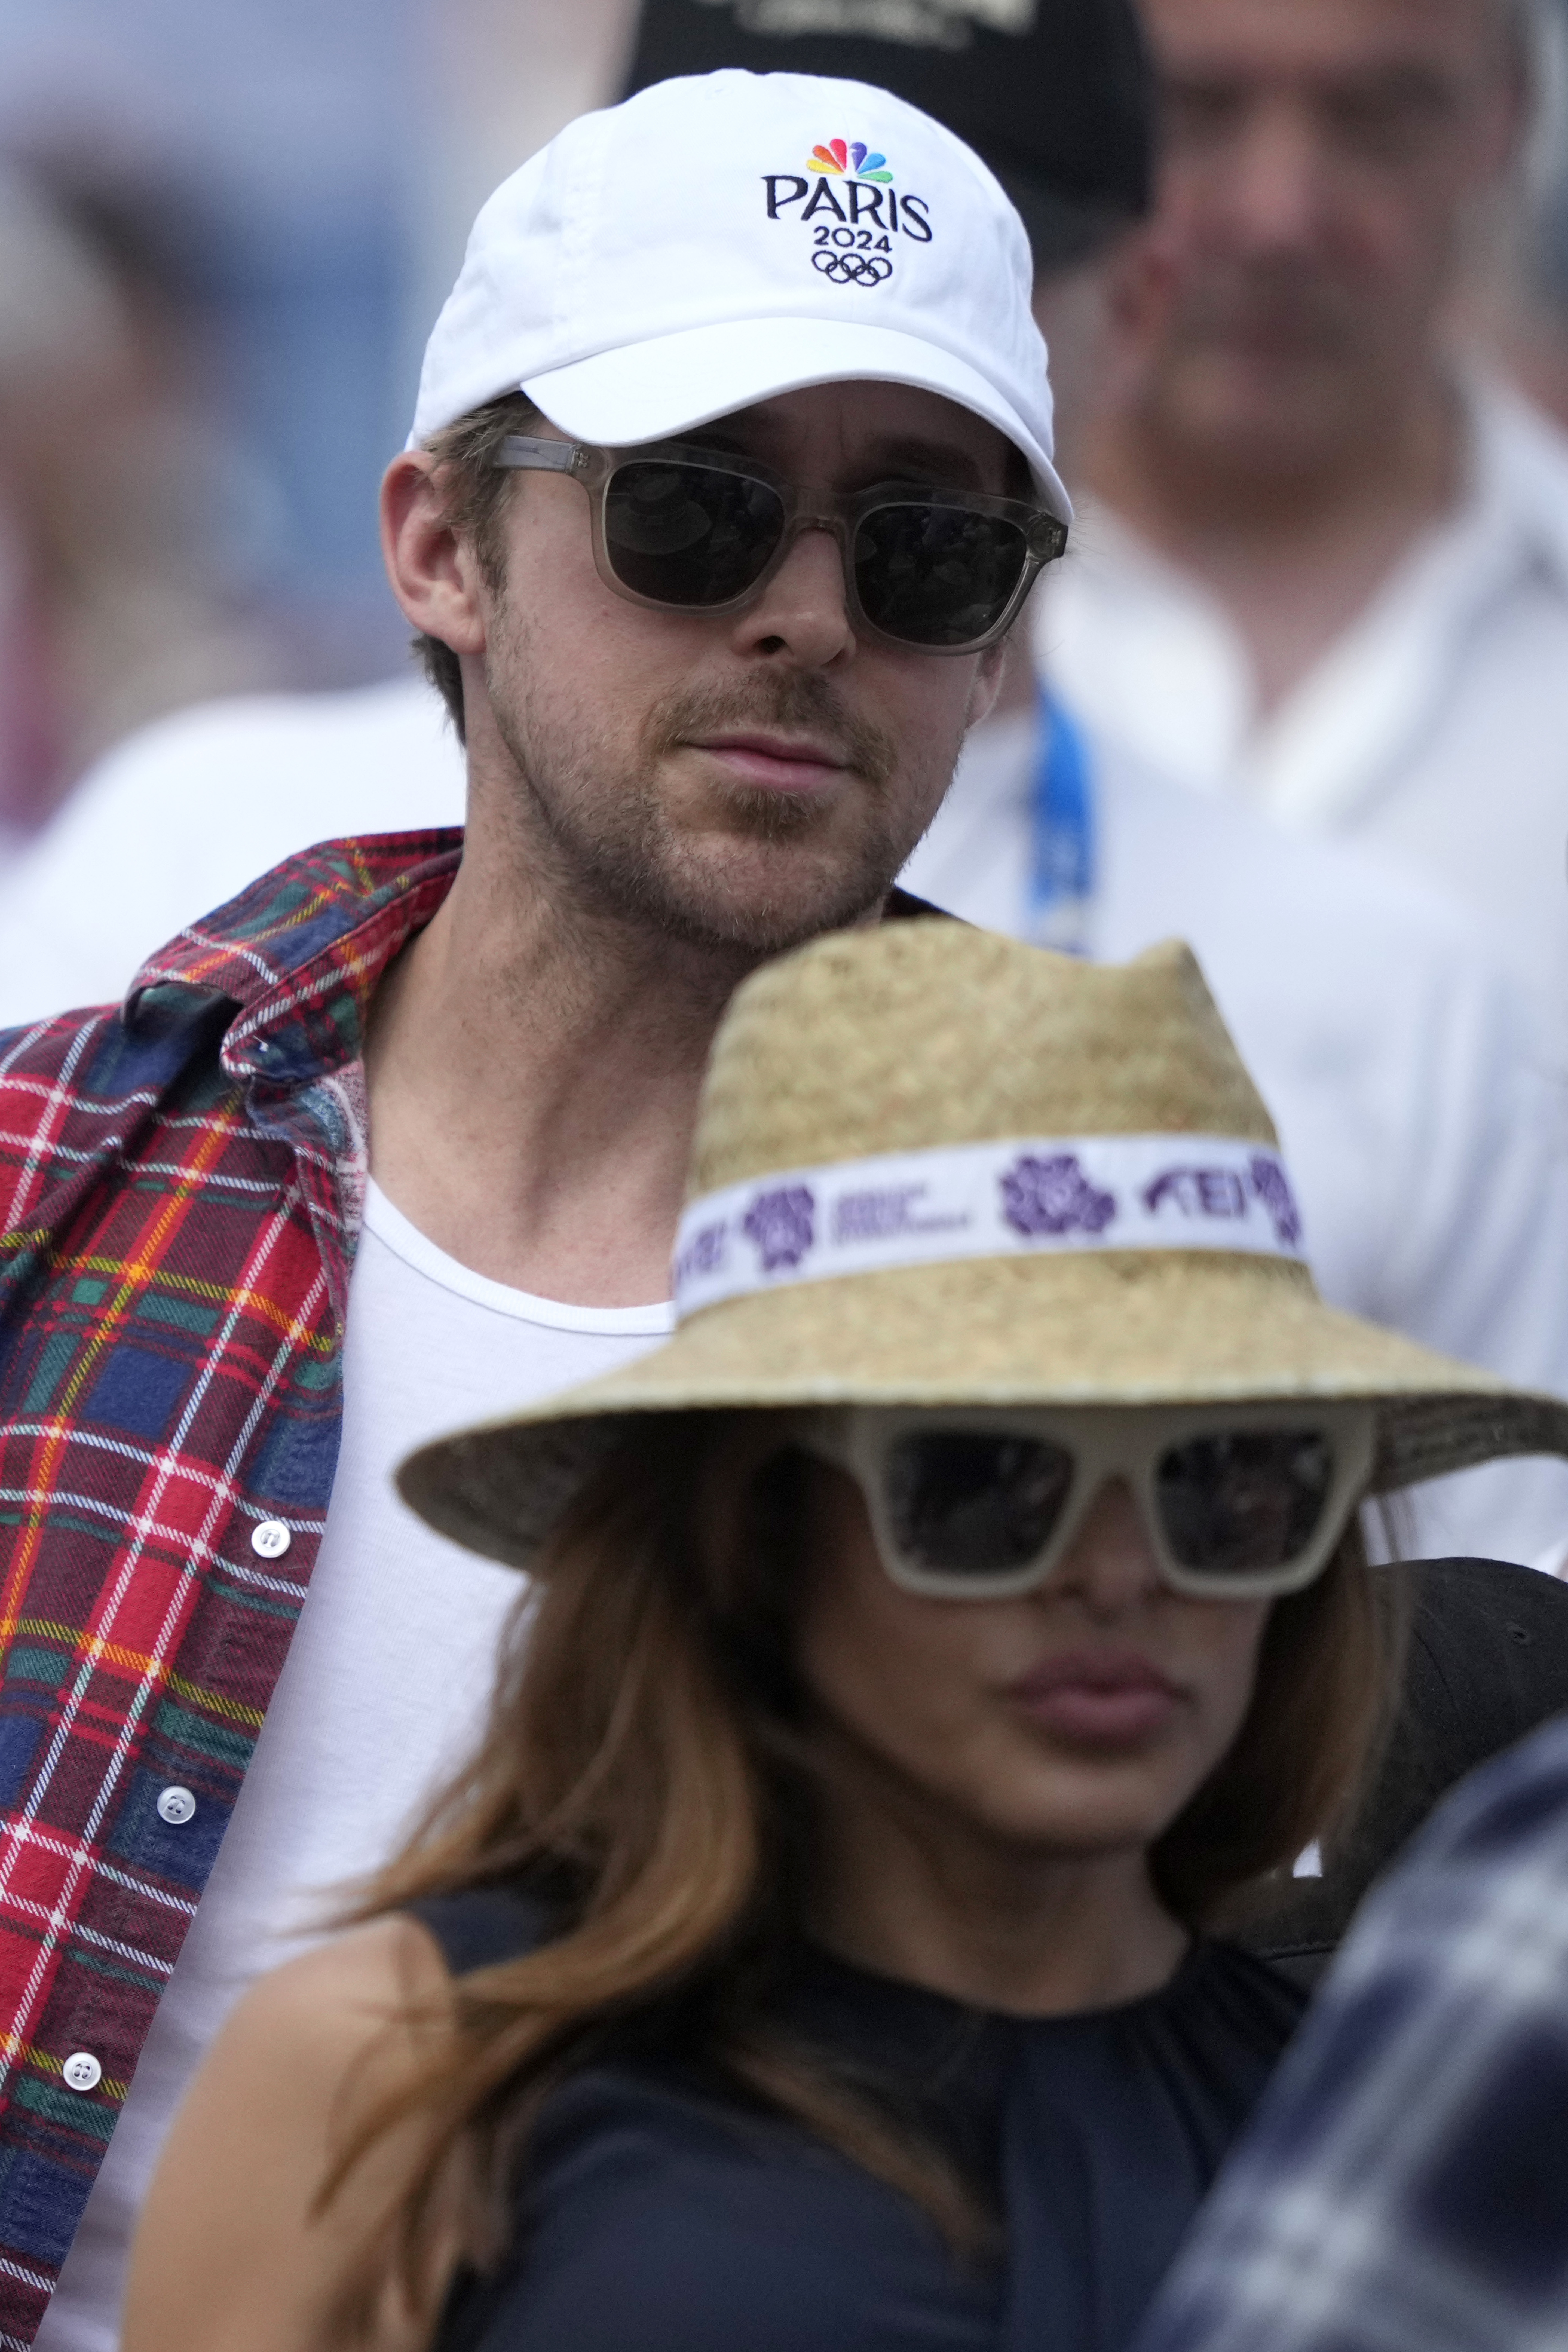 Ryan paired the hat with a colorful plaid button-up while Eva rocked a sleeveless black top